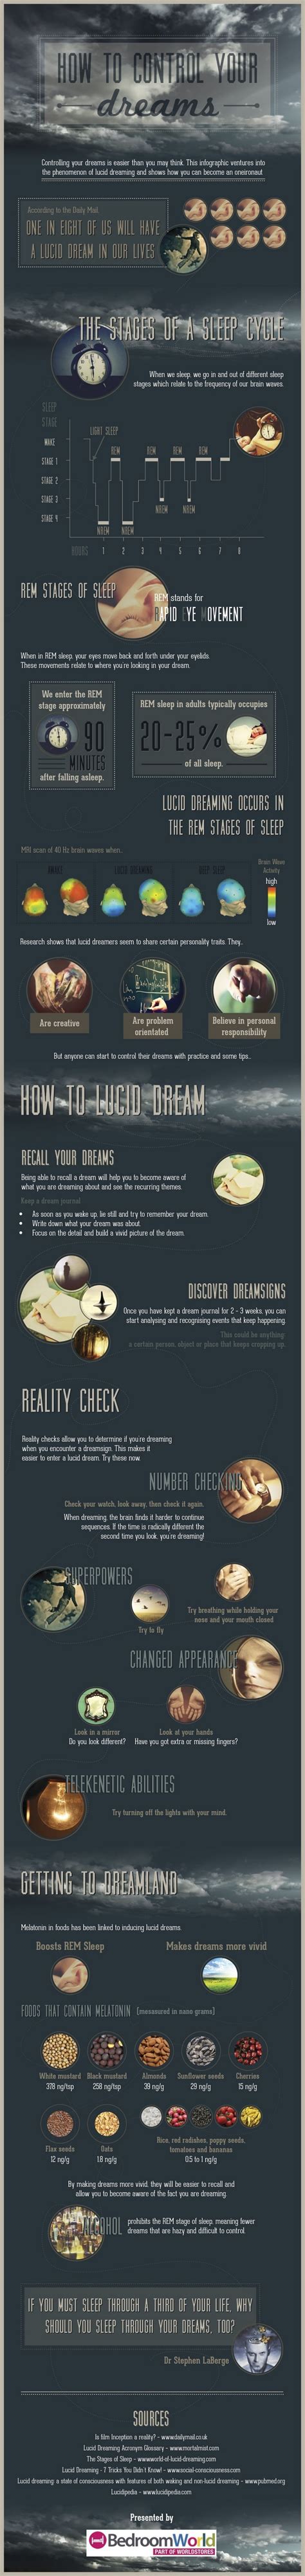 How To Control Your Dreams Infographic